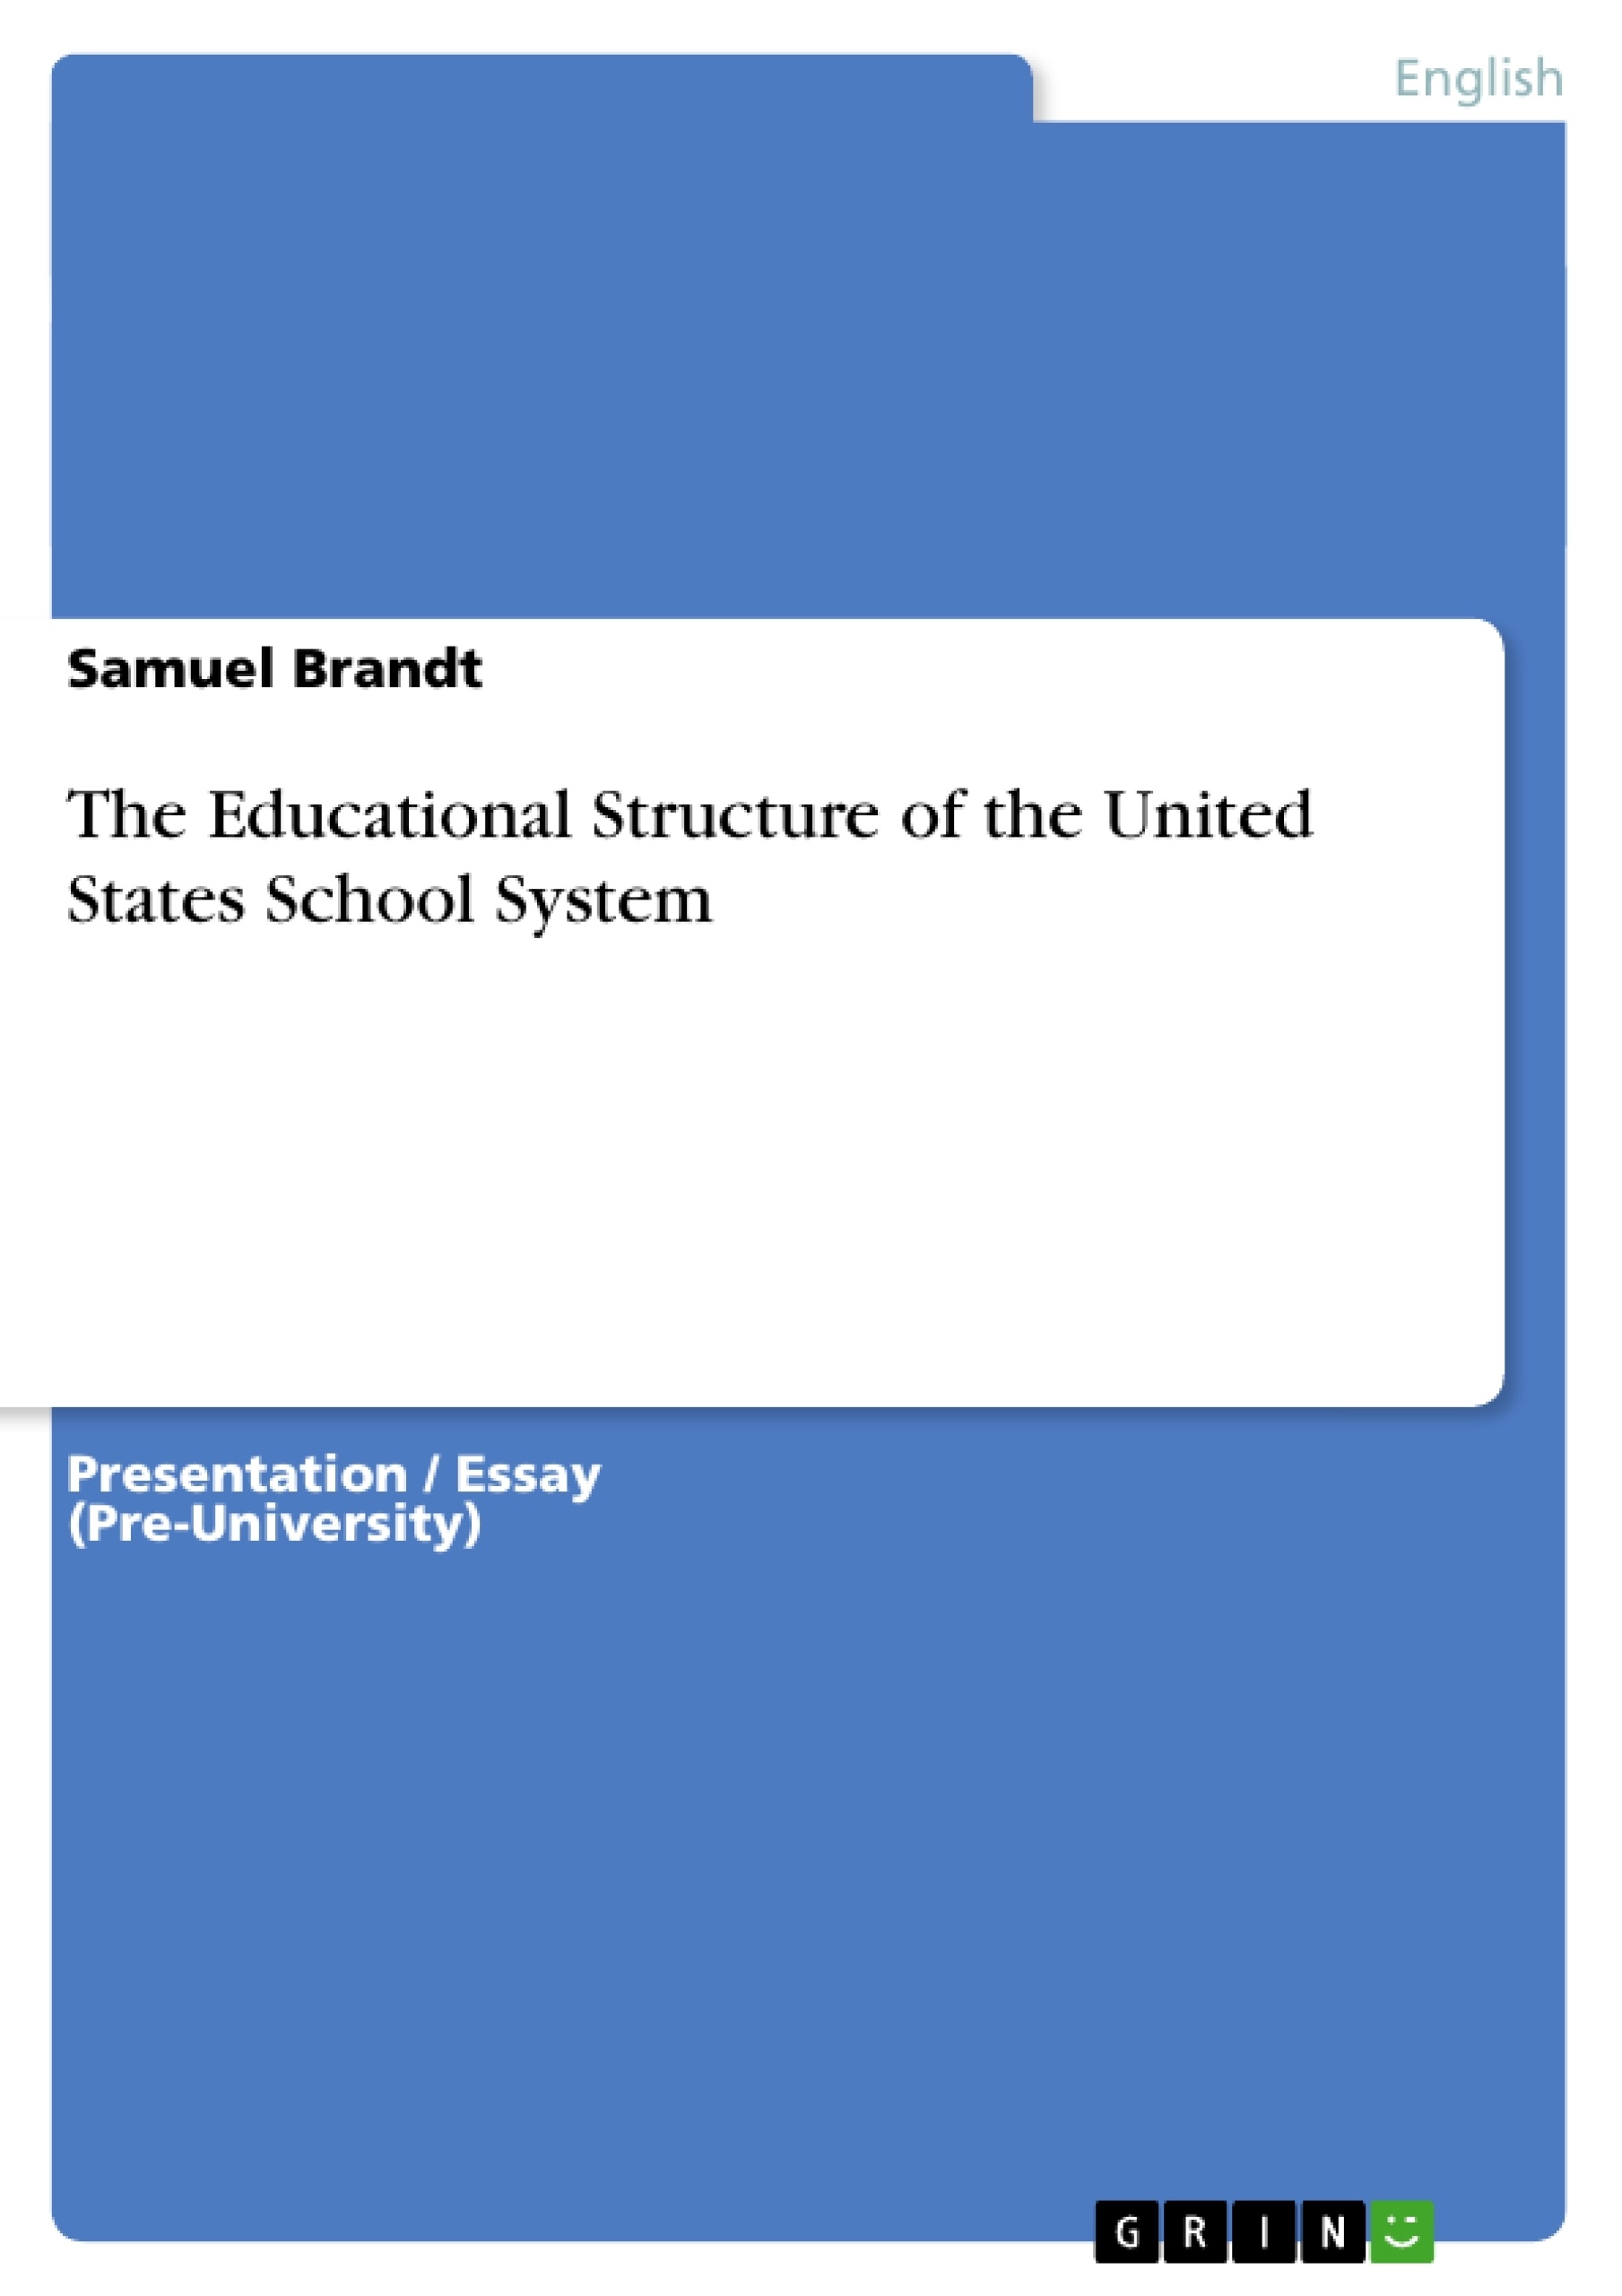 Title: The Educational Structure of the United States School System